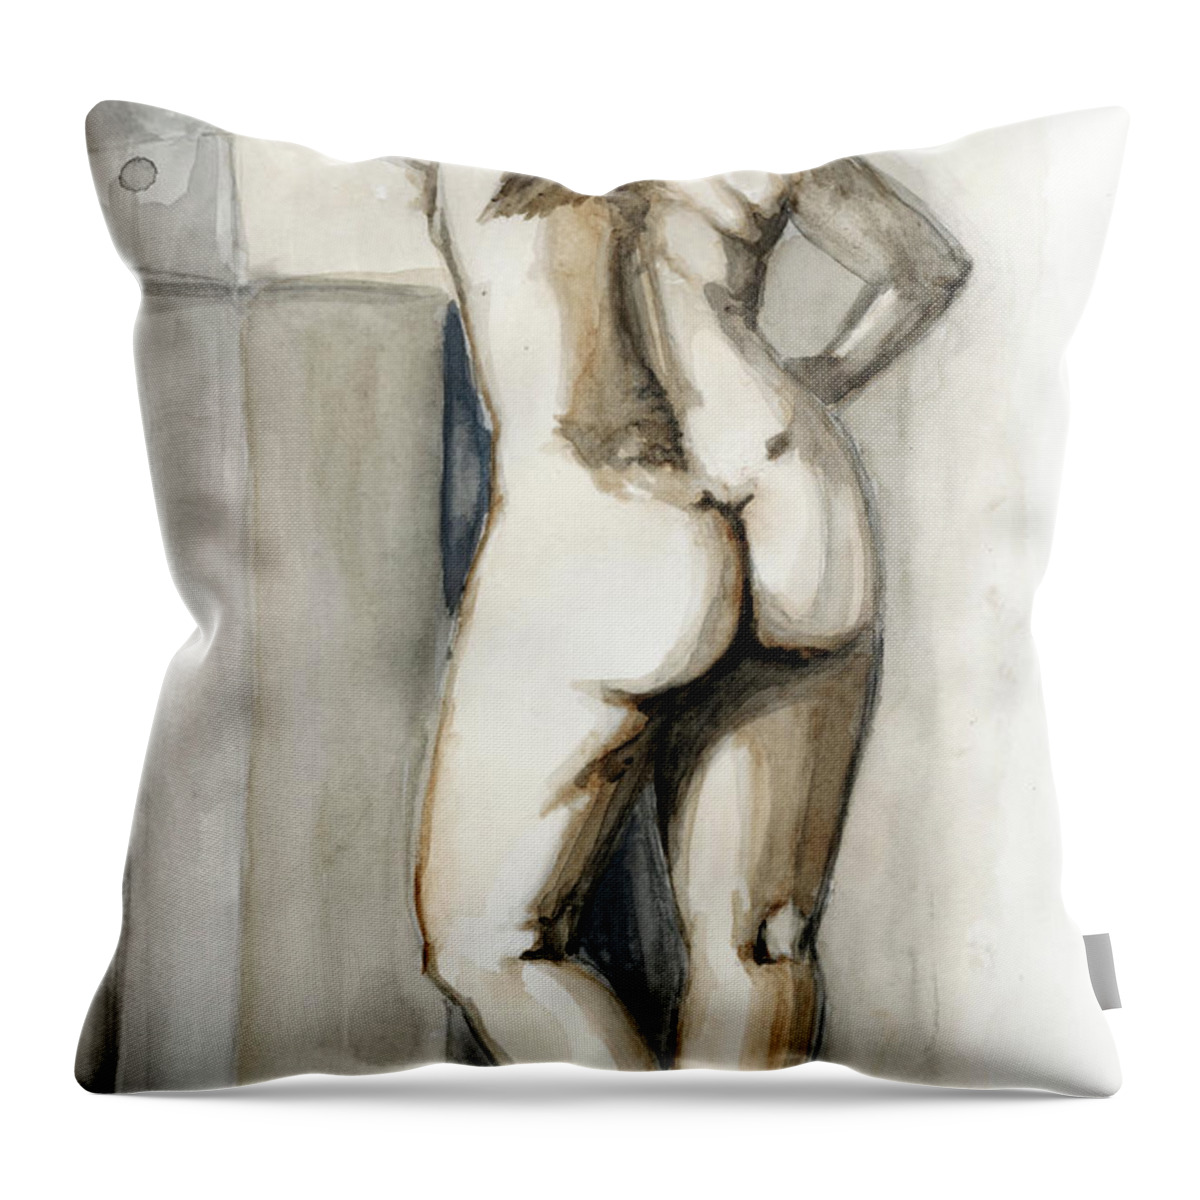 Nudel Throw Pillow featuring the painting Live Nude Female by Alban Dizdari